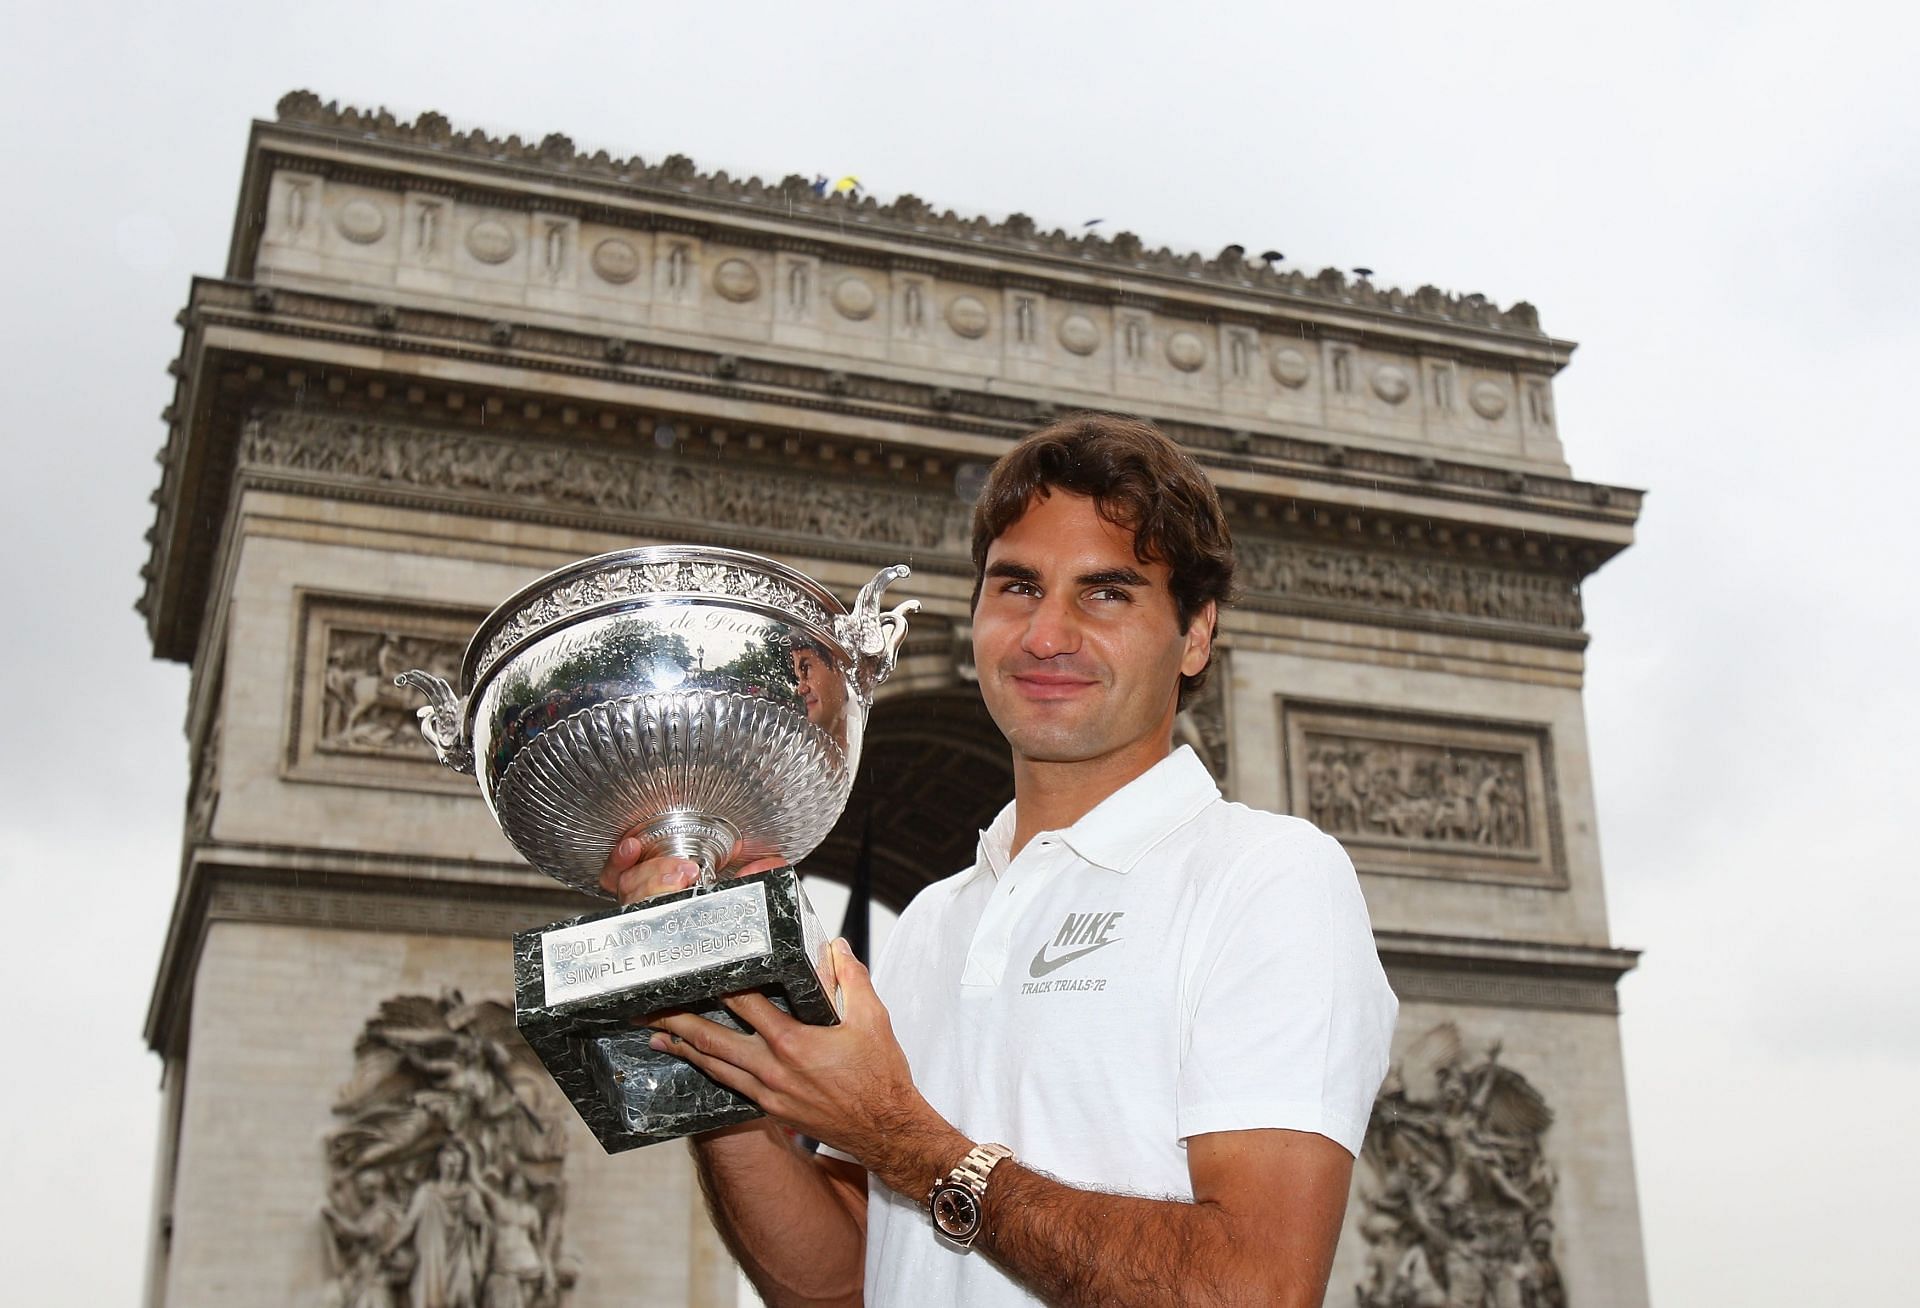 Roger Federer at the 2009 French Open.